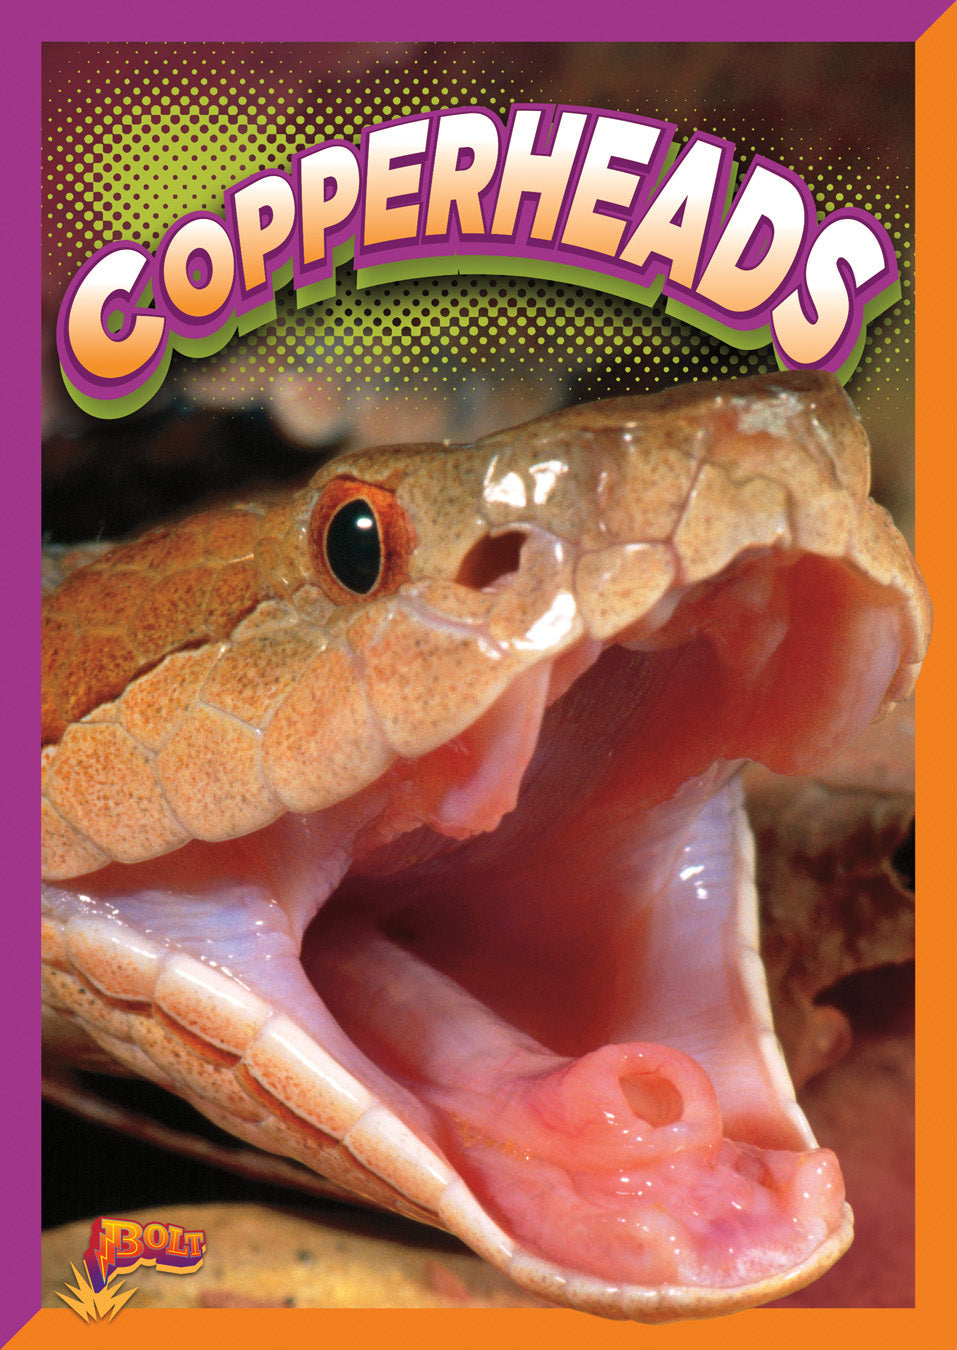 Slithering Snakes: Copperheads